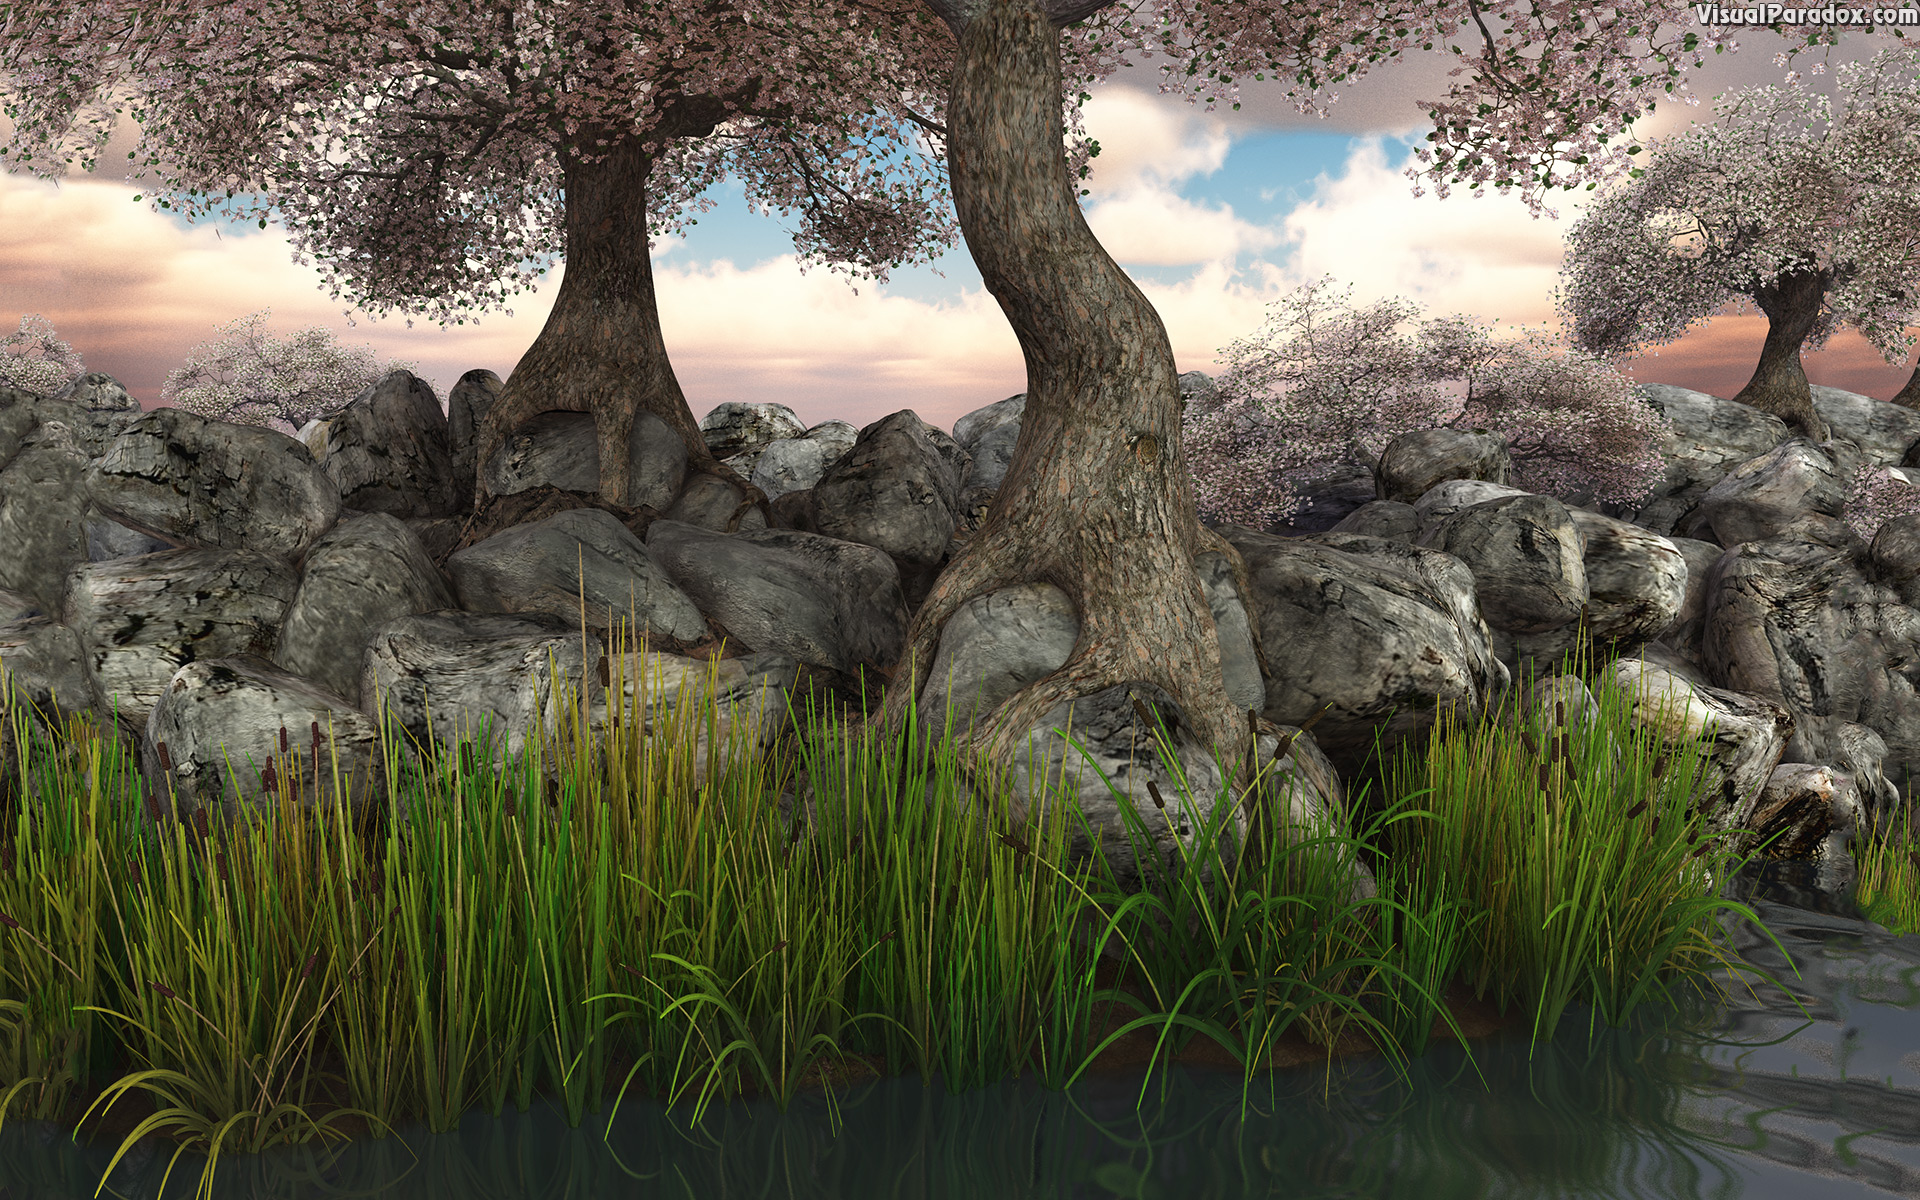 trees, blossoms, flowers, reeds, lake, pond, river, rocks, roots, knarled, tree, root, 3d, wallpaper